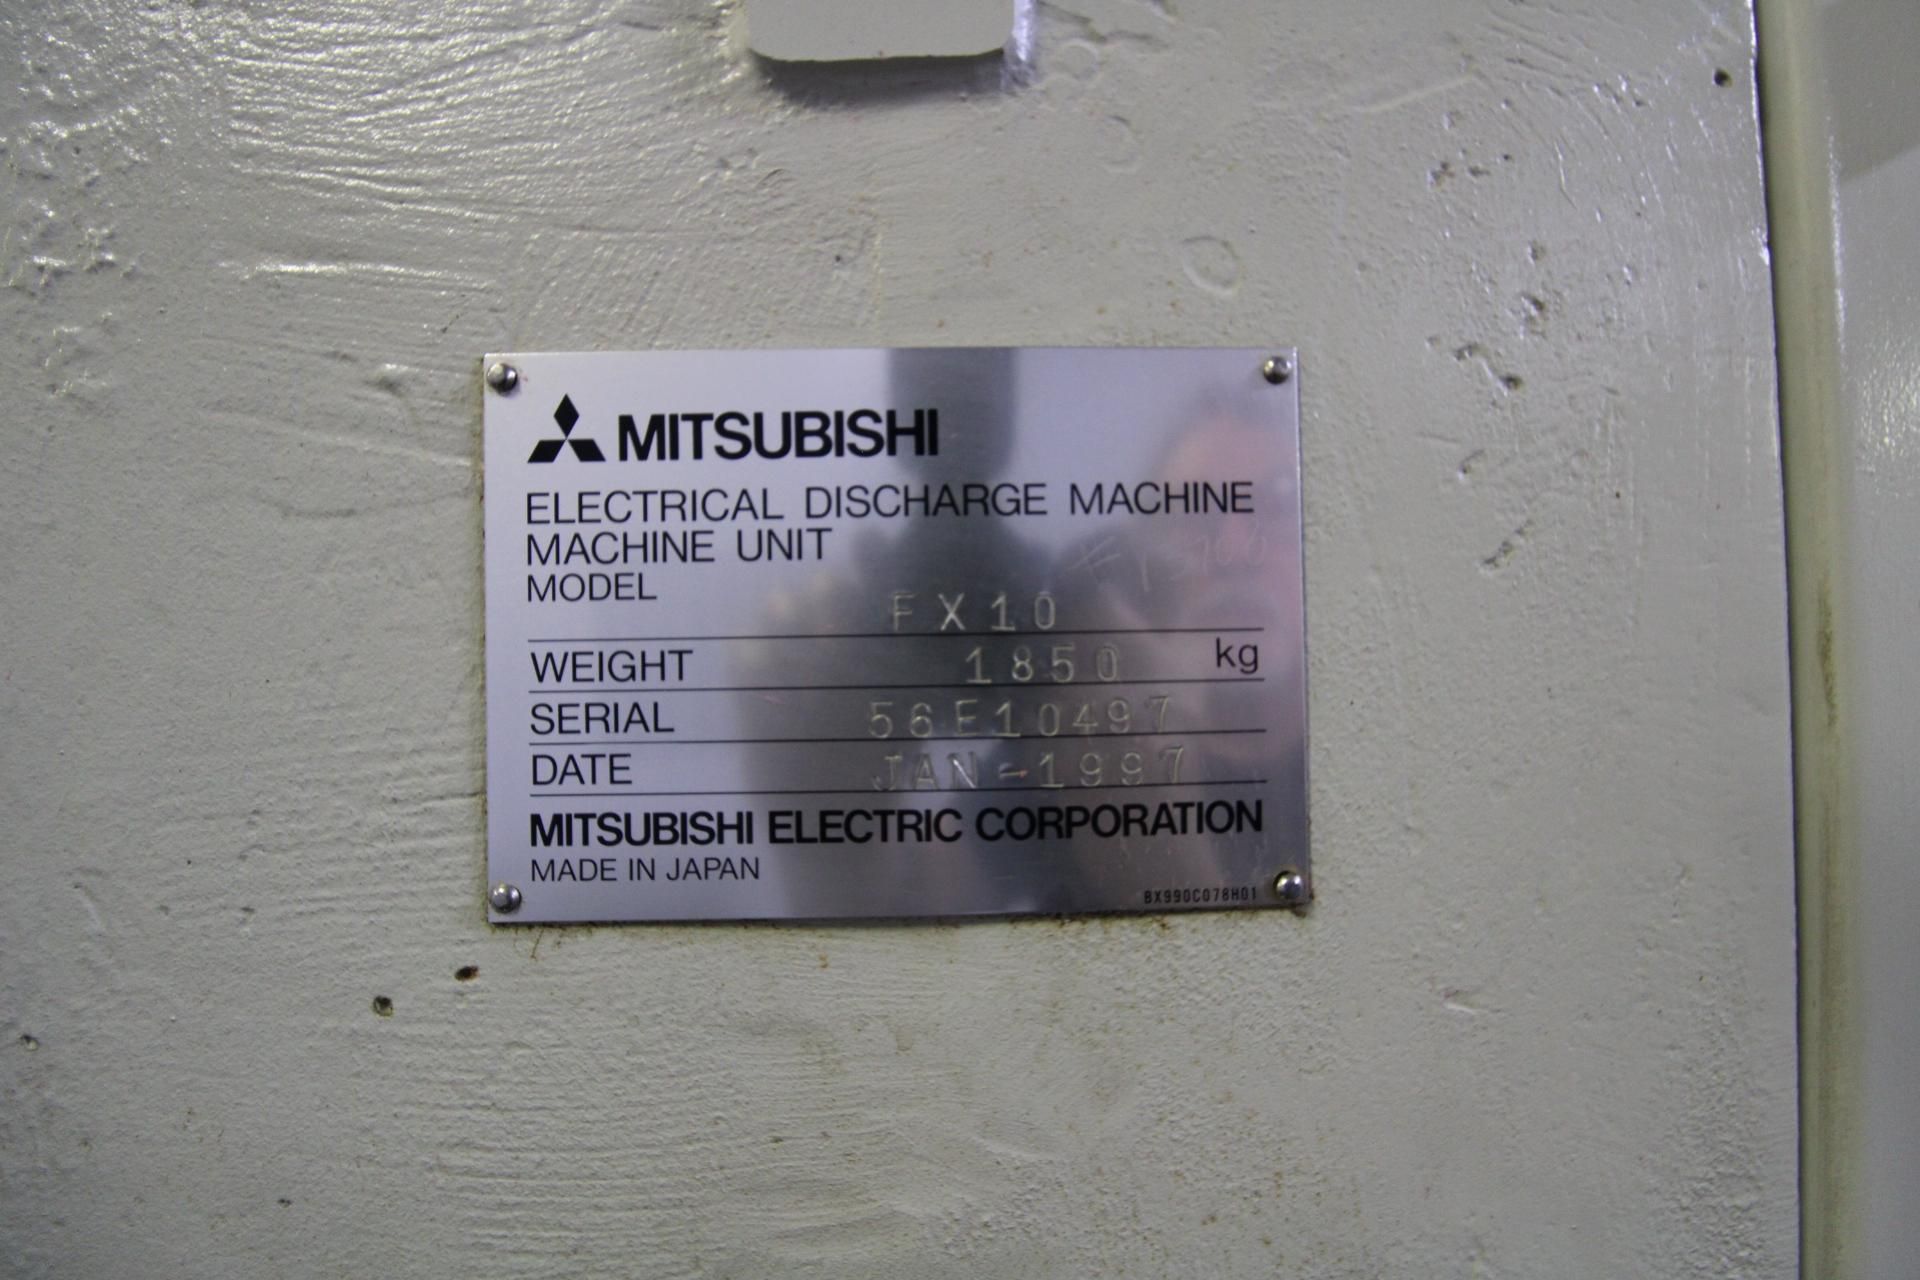 WIRE EDM MACHINE, MITSUBISHI MDL. FX-10, new 1997, 33.46”-X, 25.59”-Y, 8.6”-Z axis travels, 1,763 - Image 7 of 12